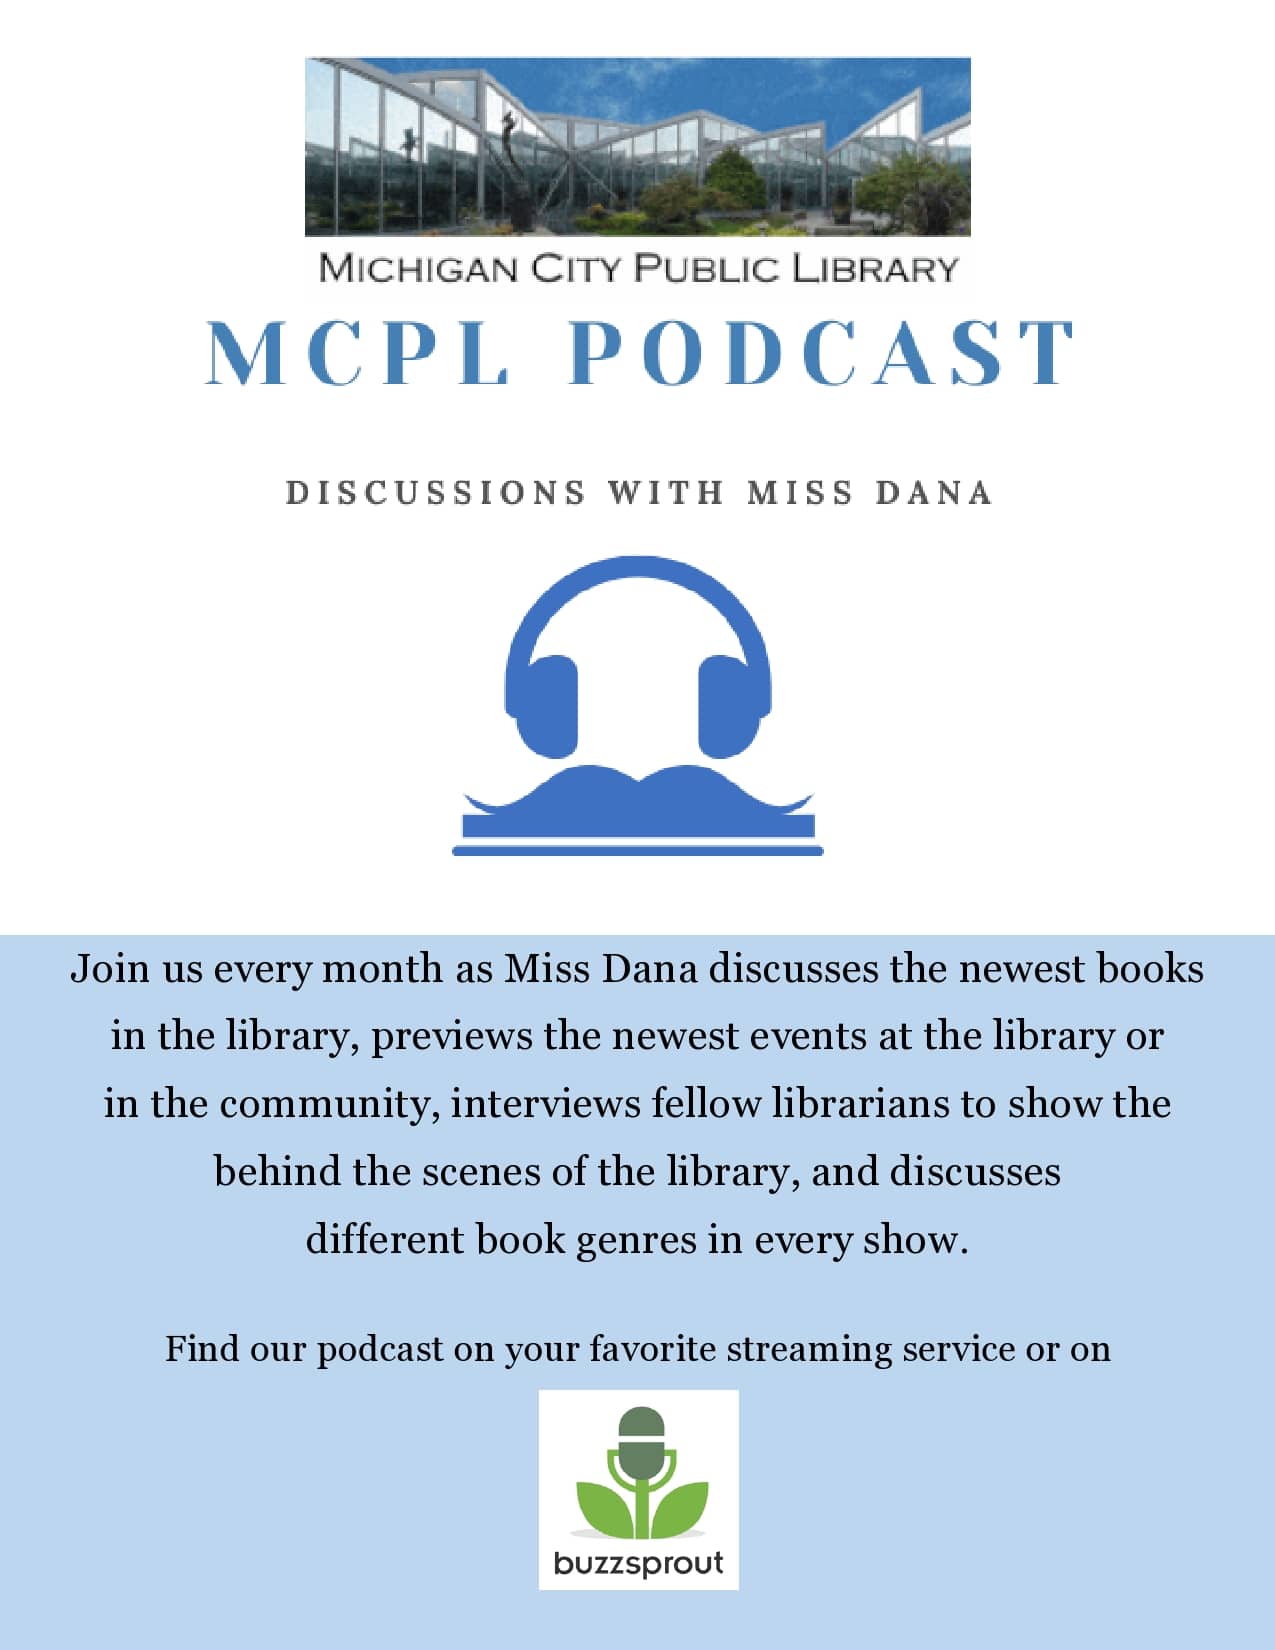 MCPL Podcast: Discussions with Miss Dana. Join us every month as Miss Dana discusses the newest books in the library, previews the newest events at the library or in the community, interviews fellow librarians to show the behind the scenes of the library, and discusses different book genres in every show. Find our podcast on your favorite streaming service or on Buzzsprout.